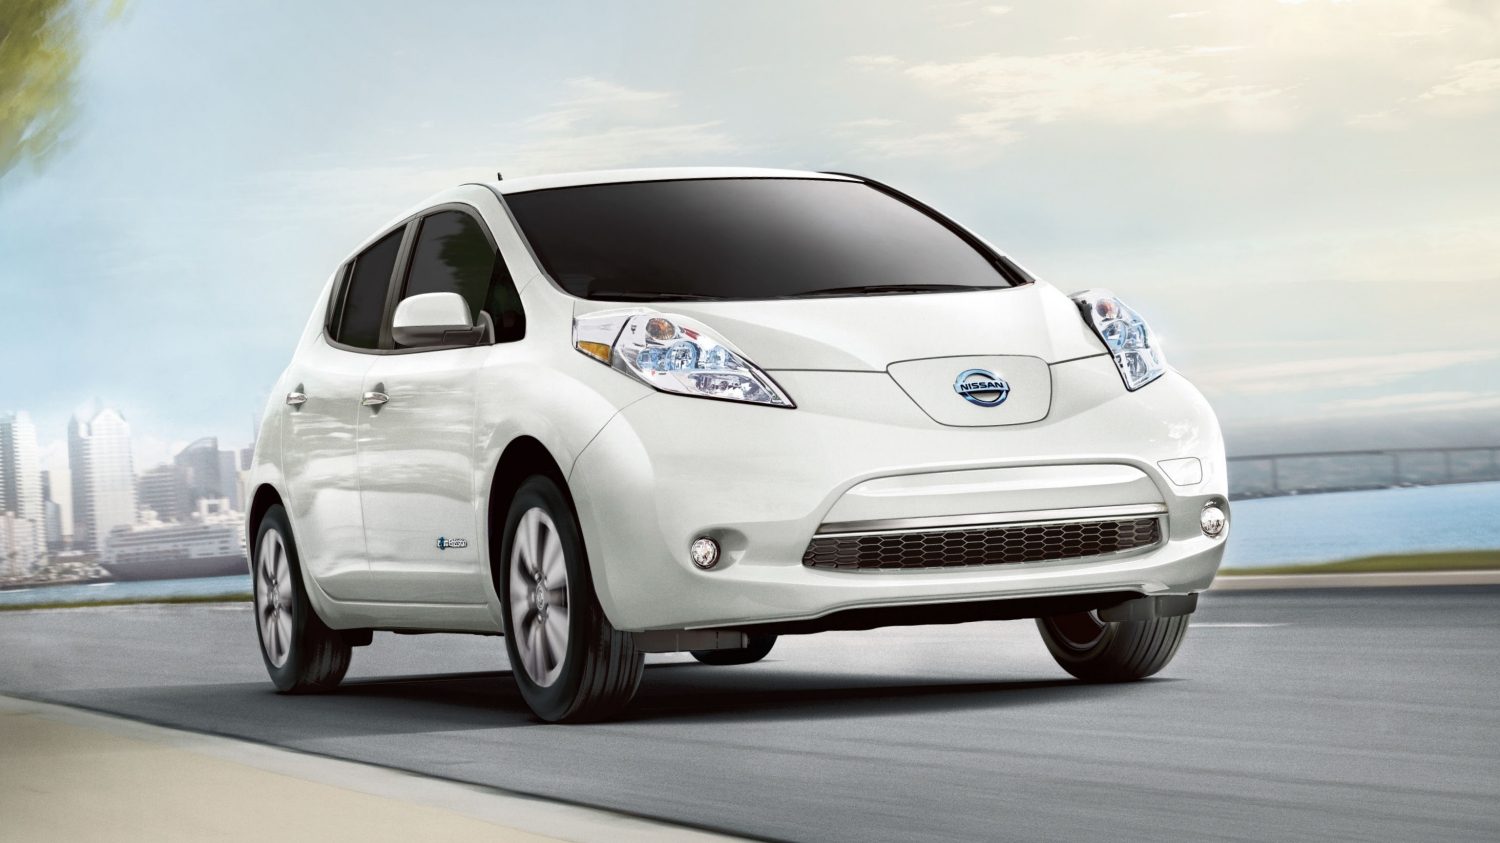 Study co-author says an EV such as the Nissan Leaf could be as cheap to operate and own as a petrol car, without subsidy, by 2025.